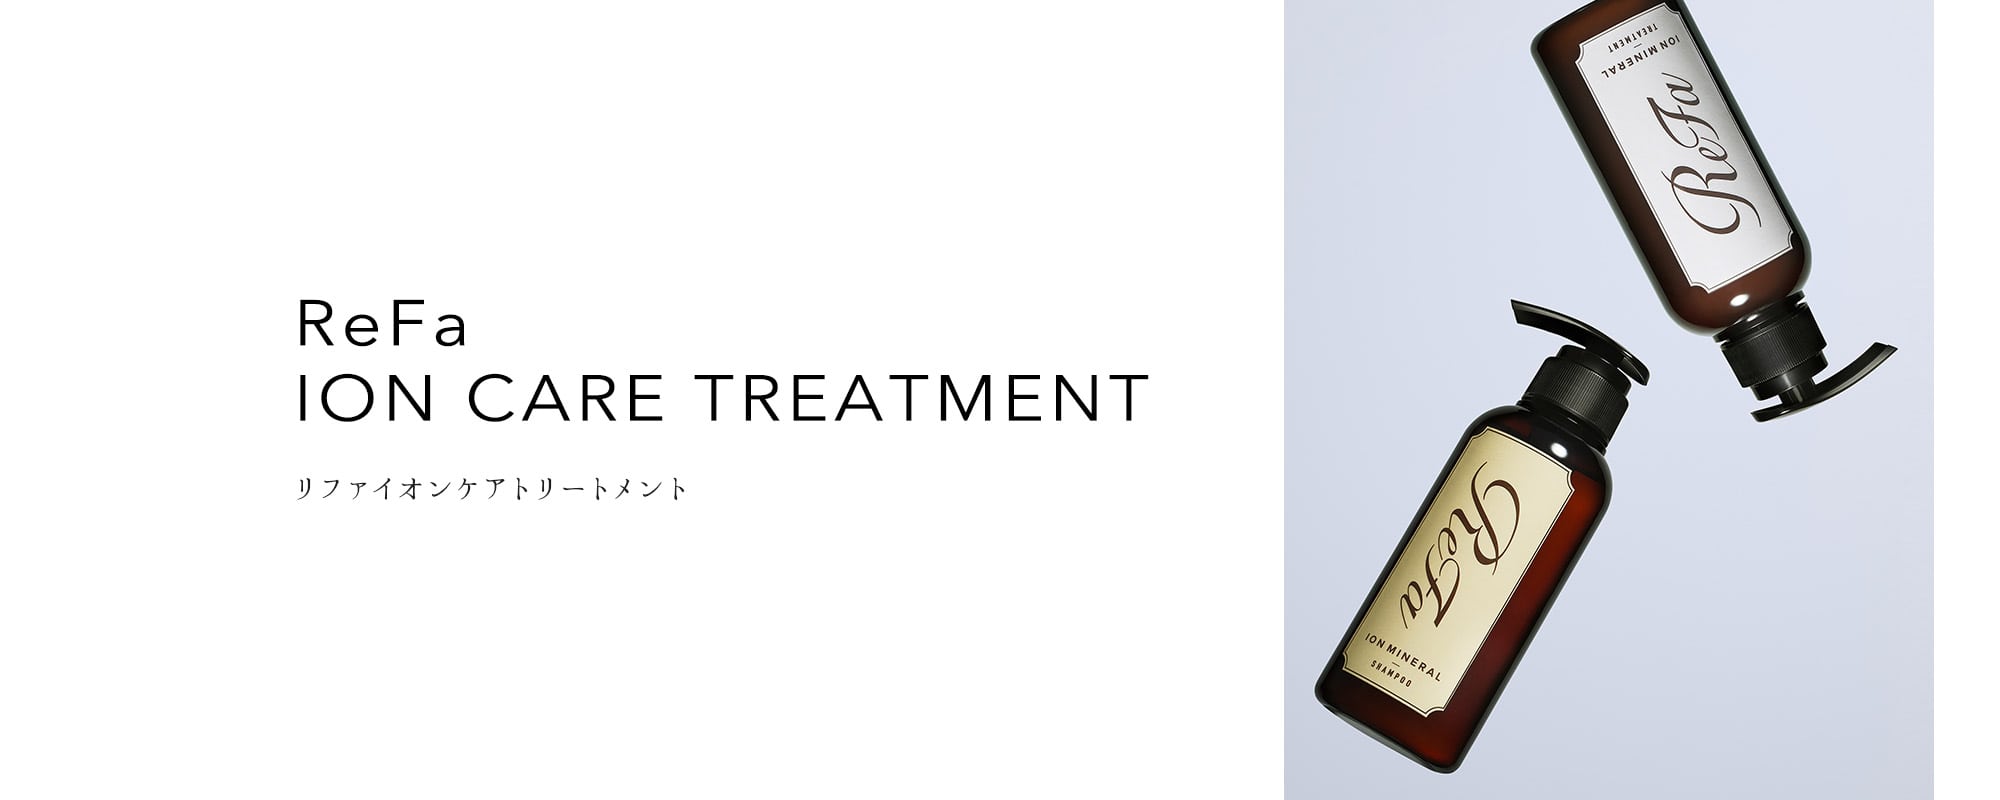 ReFa ION CARE TREATMENT（リファイオンケアトリートメント）